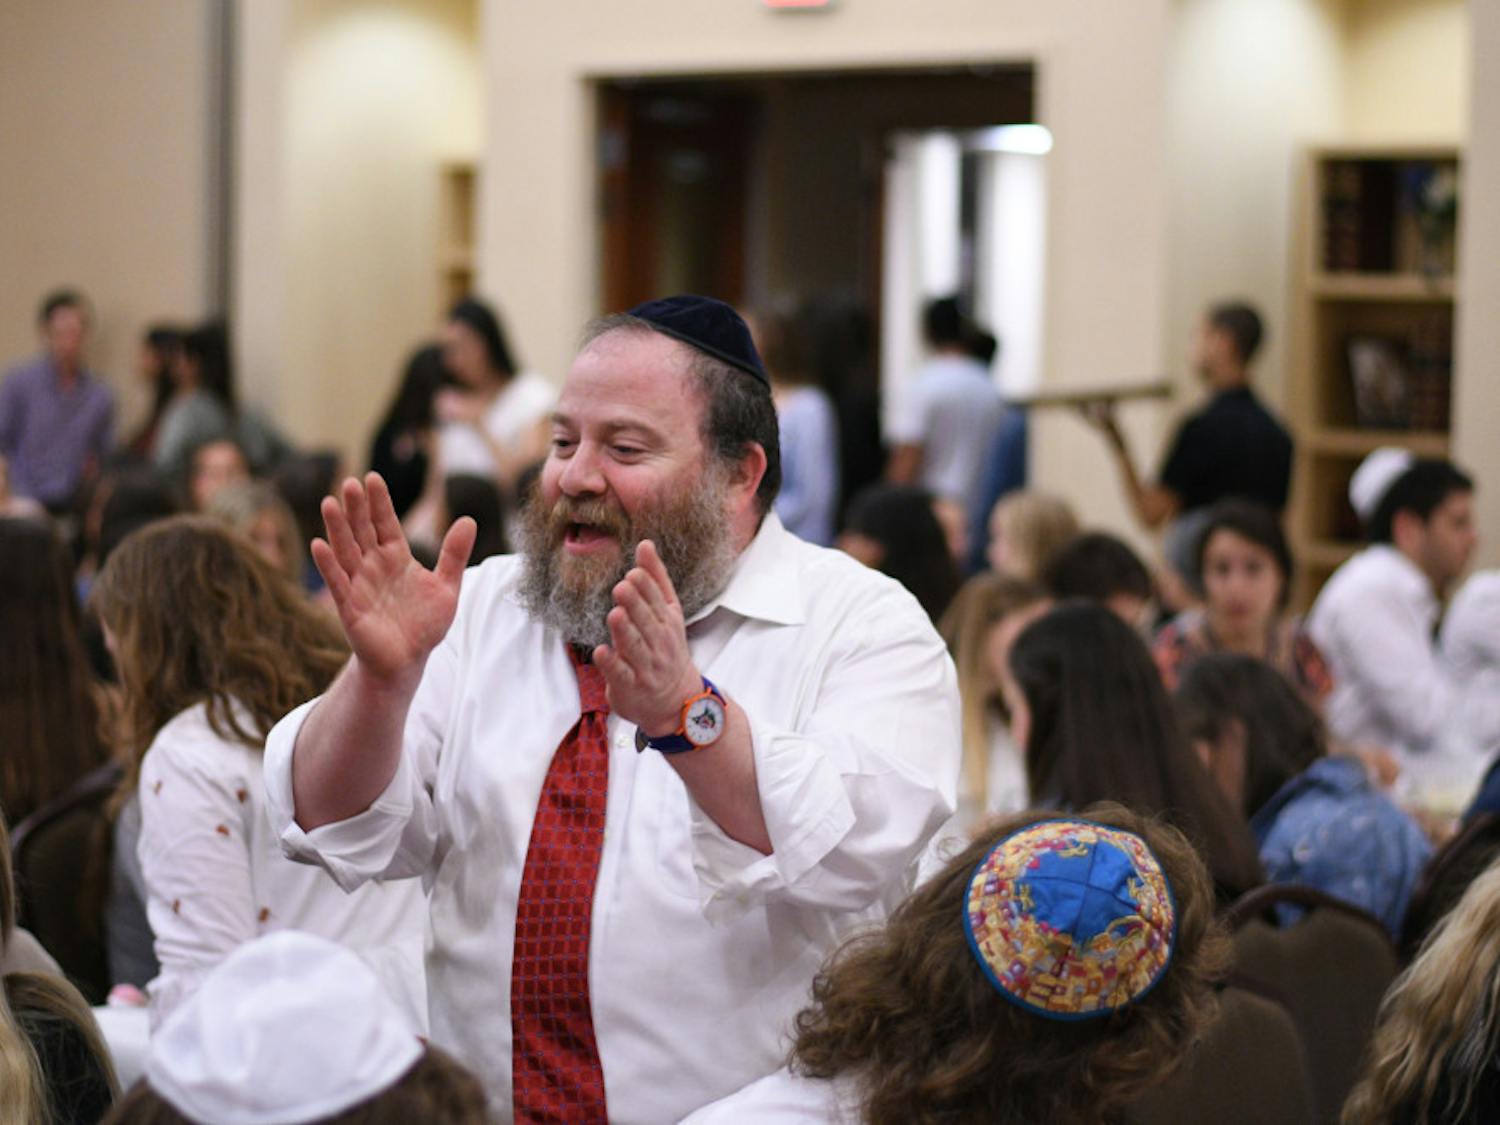 Rabbi Berl Goldman celebrates with attendees during the Lubavitch Chabad Jewish Student and Community Center’s Rosh Hashanah service Sunday night. The service commemorates the Jewish new year and is delivered in Hebrew.